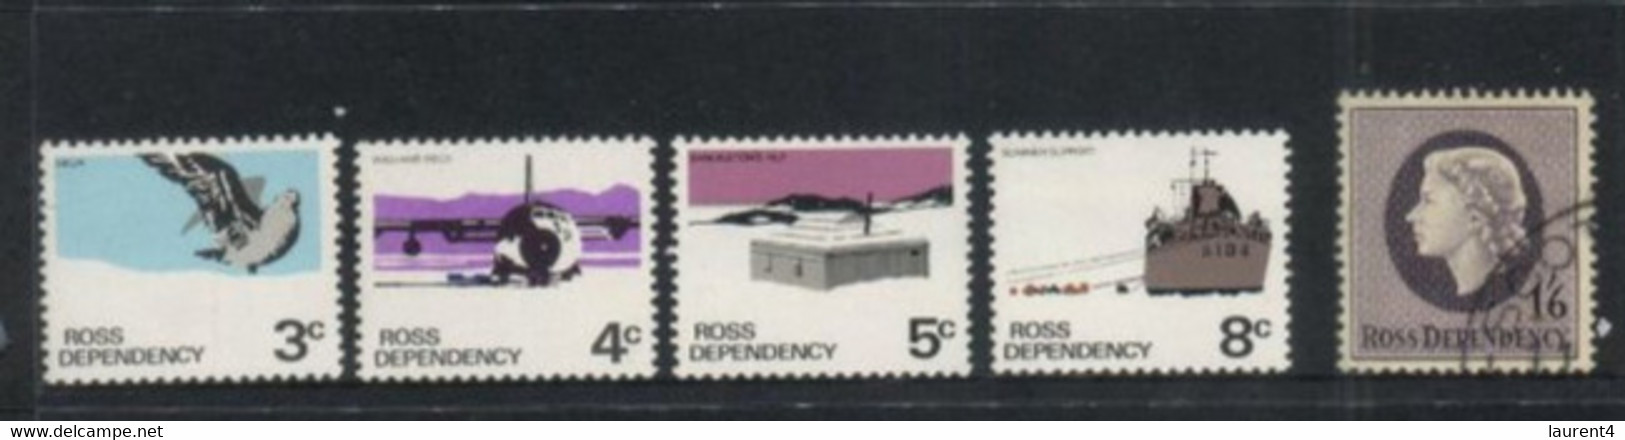 (Stamps 21-10-2020)  Ross Dependency (New Zeland Antarctic) -  18 Used Stamps - Used Stamps